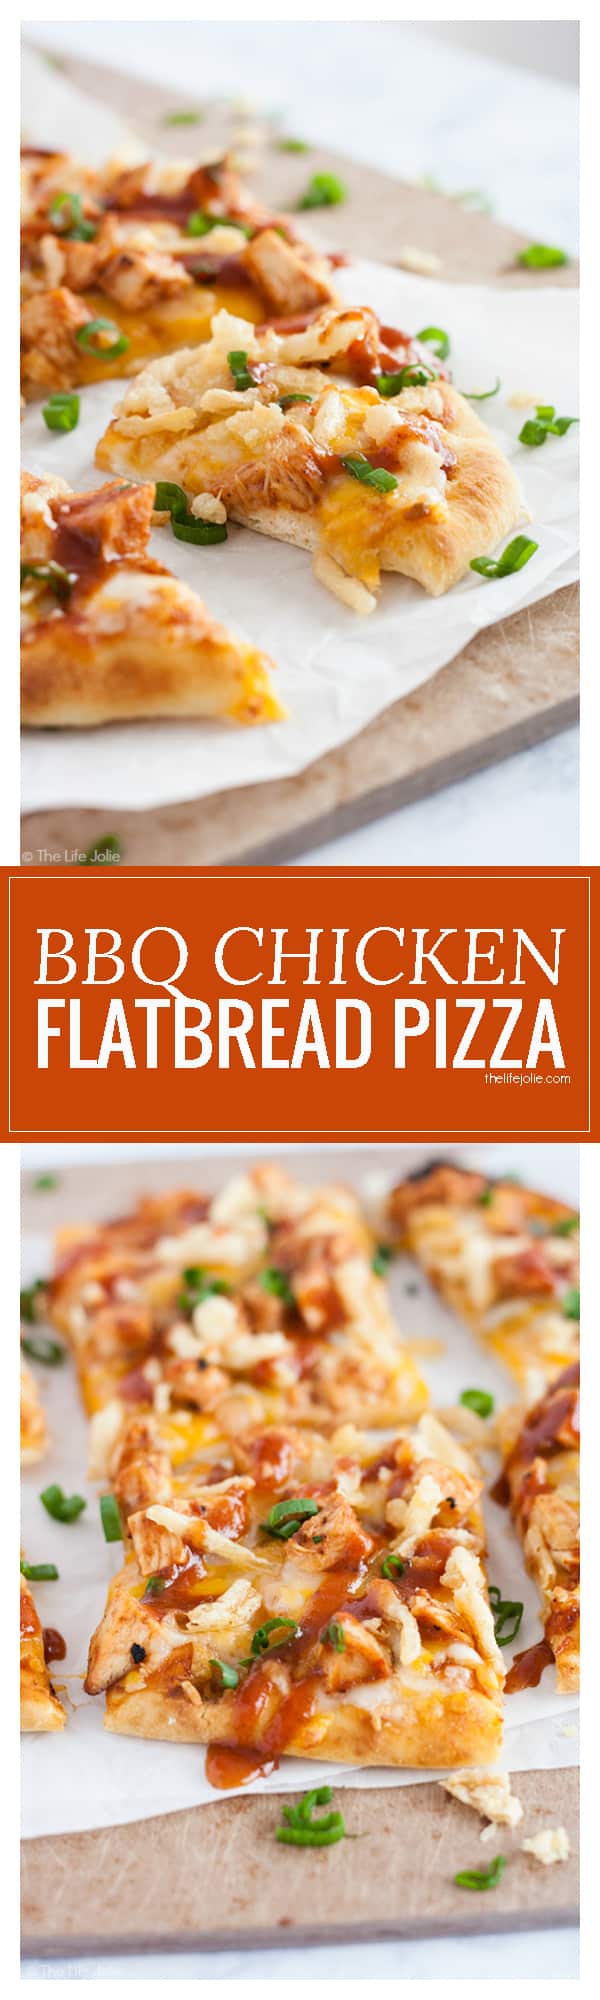 Need a quick meal for those busy back-to-school nights when you're shuffling between activities? Look no further! This BBQ Chicken Flatbread Pizza is the perfect weeknight meal. It is really quick and easy to make- juicy grilled chicken, melty cheese, tangy BBQ sauce and crunchy fried onions. This is a meal your whole family will enjoy!